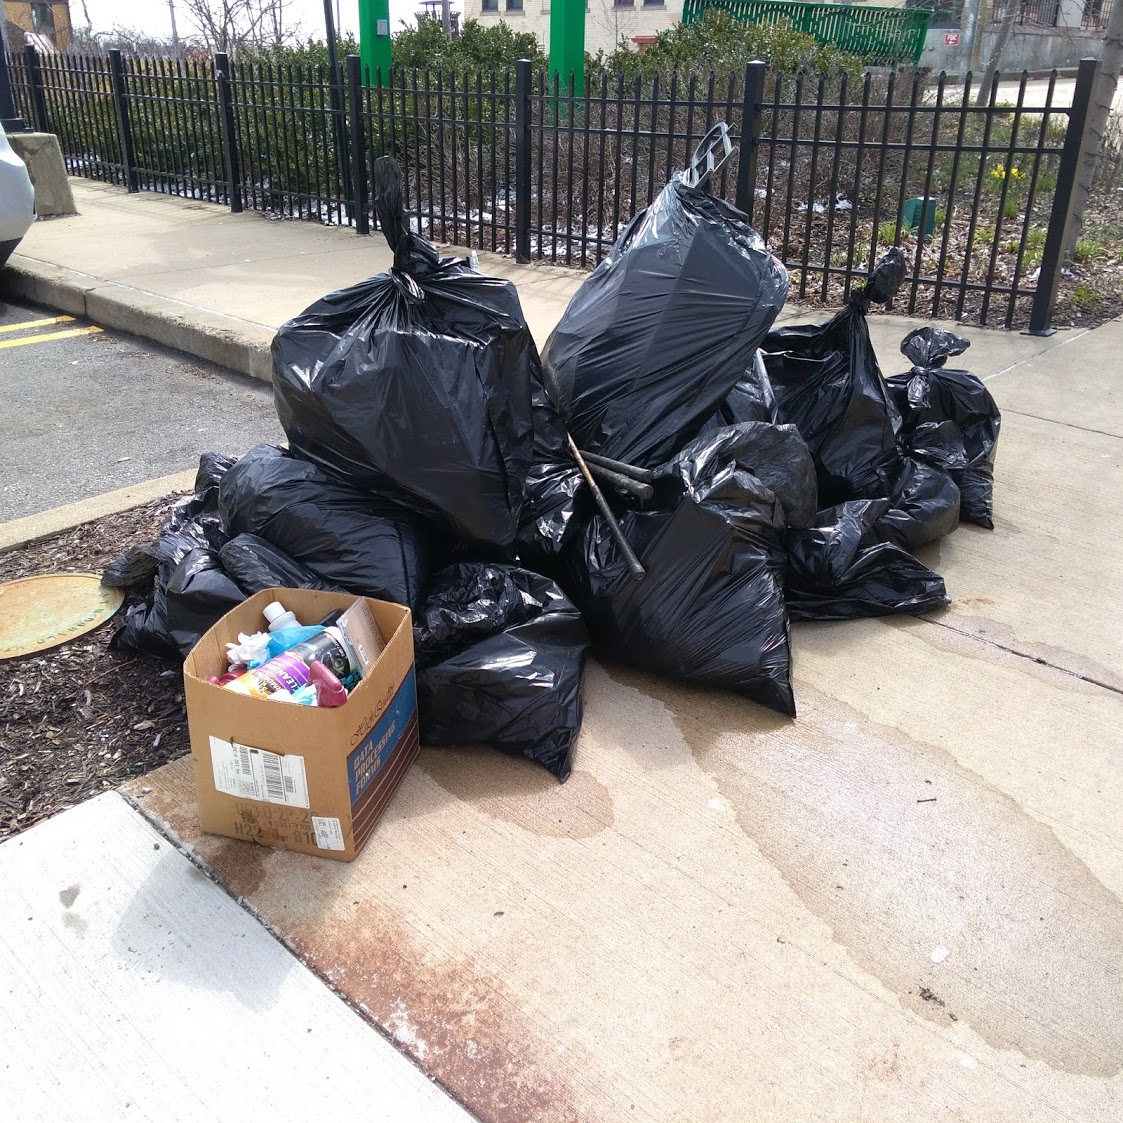 Pile of garbage bags on the sidewalk near Broadway Ave.